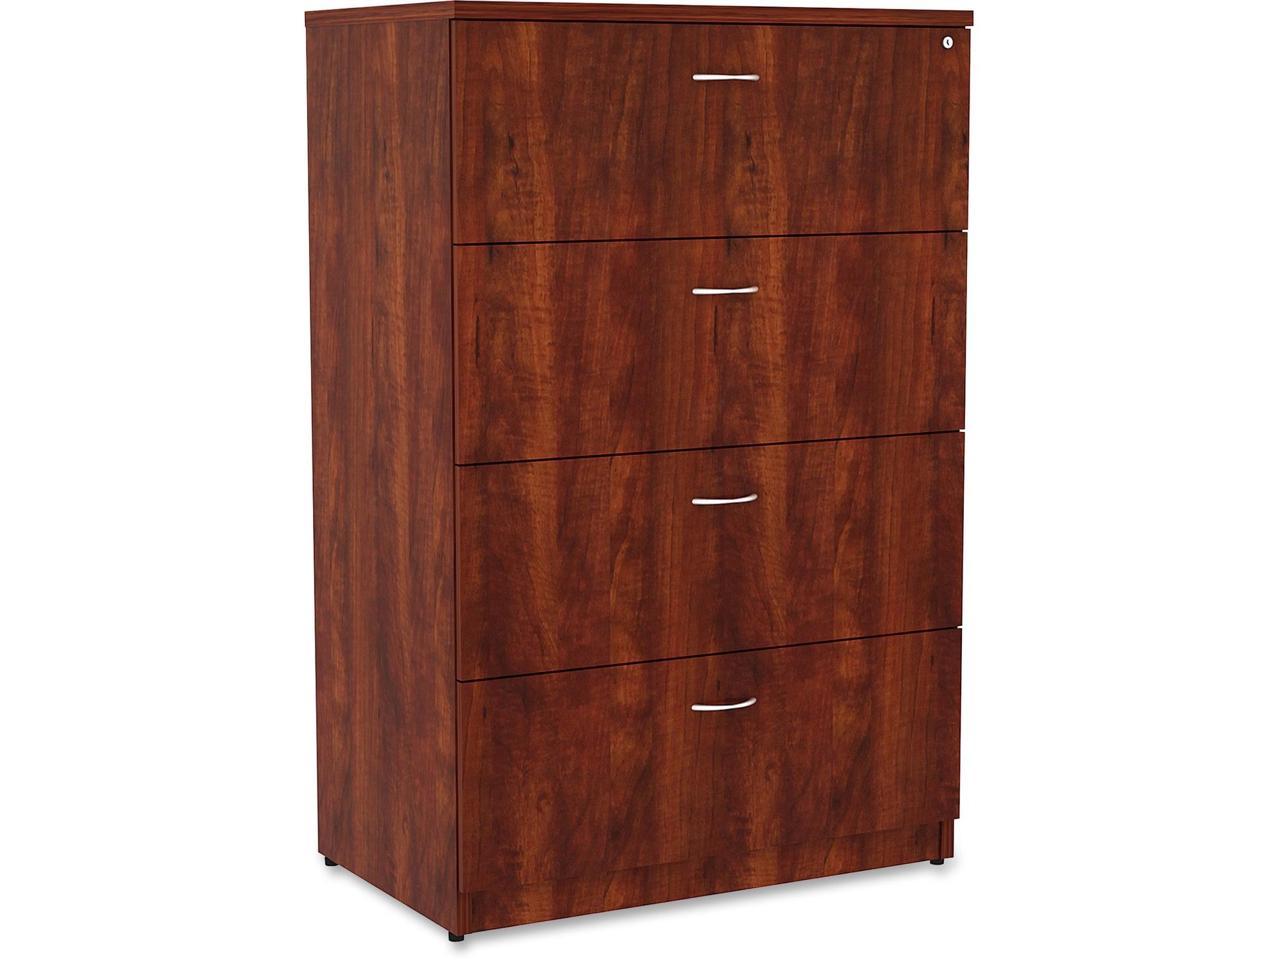 Lorell 4-Drawer Lateral File 35-1/2"x22"x54-3/4" Cherry 34387 - image 1 of 5